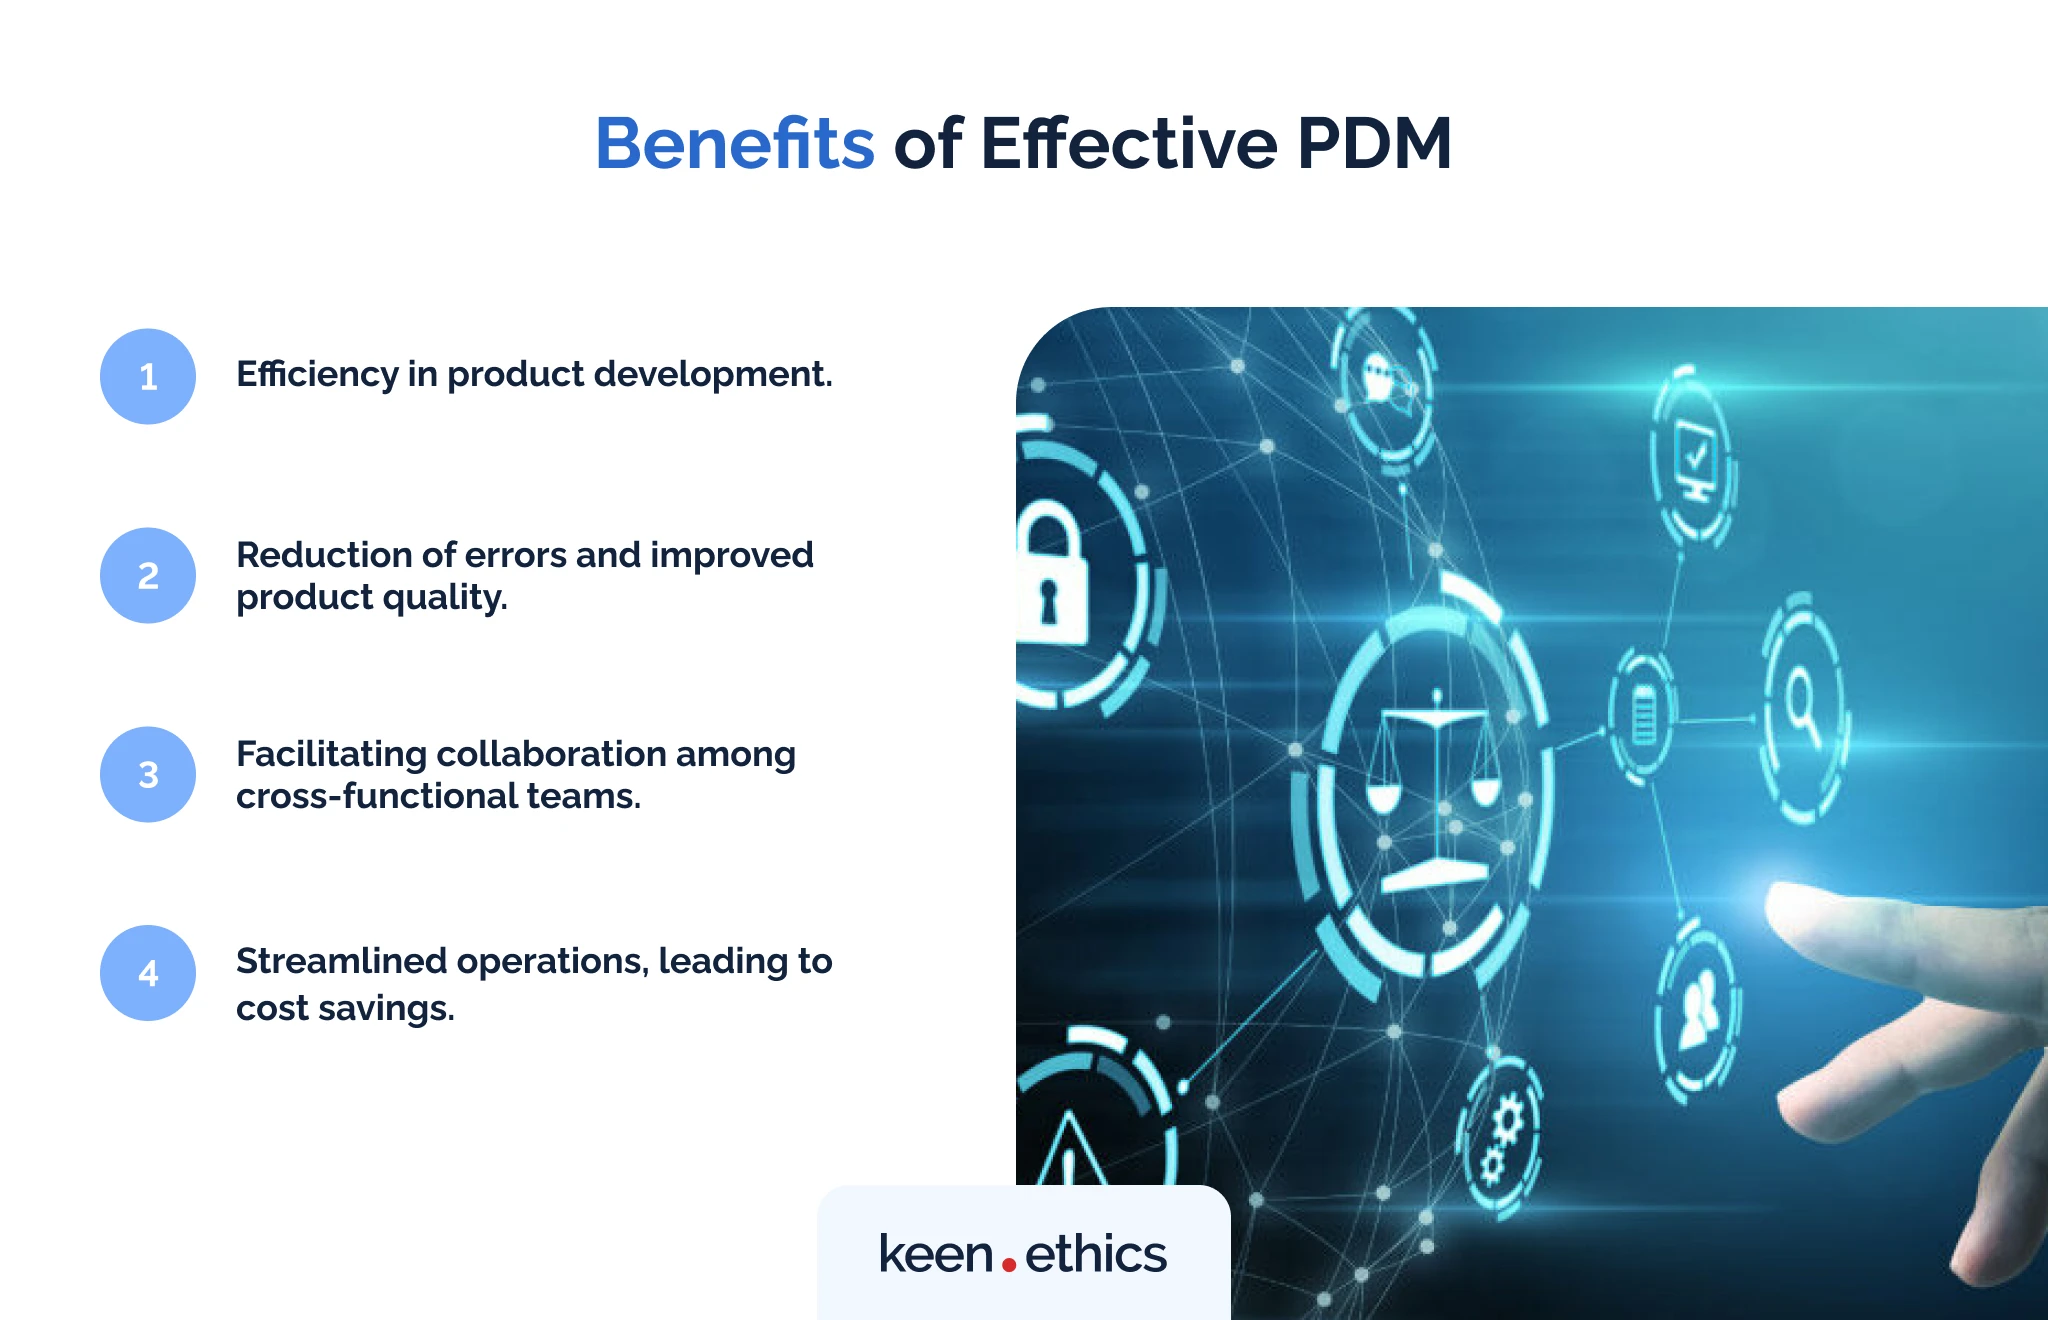 Benefits of effective PDM